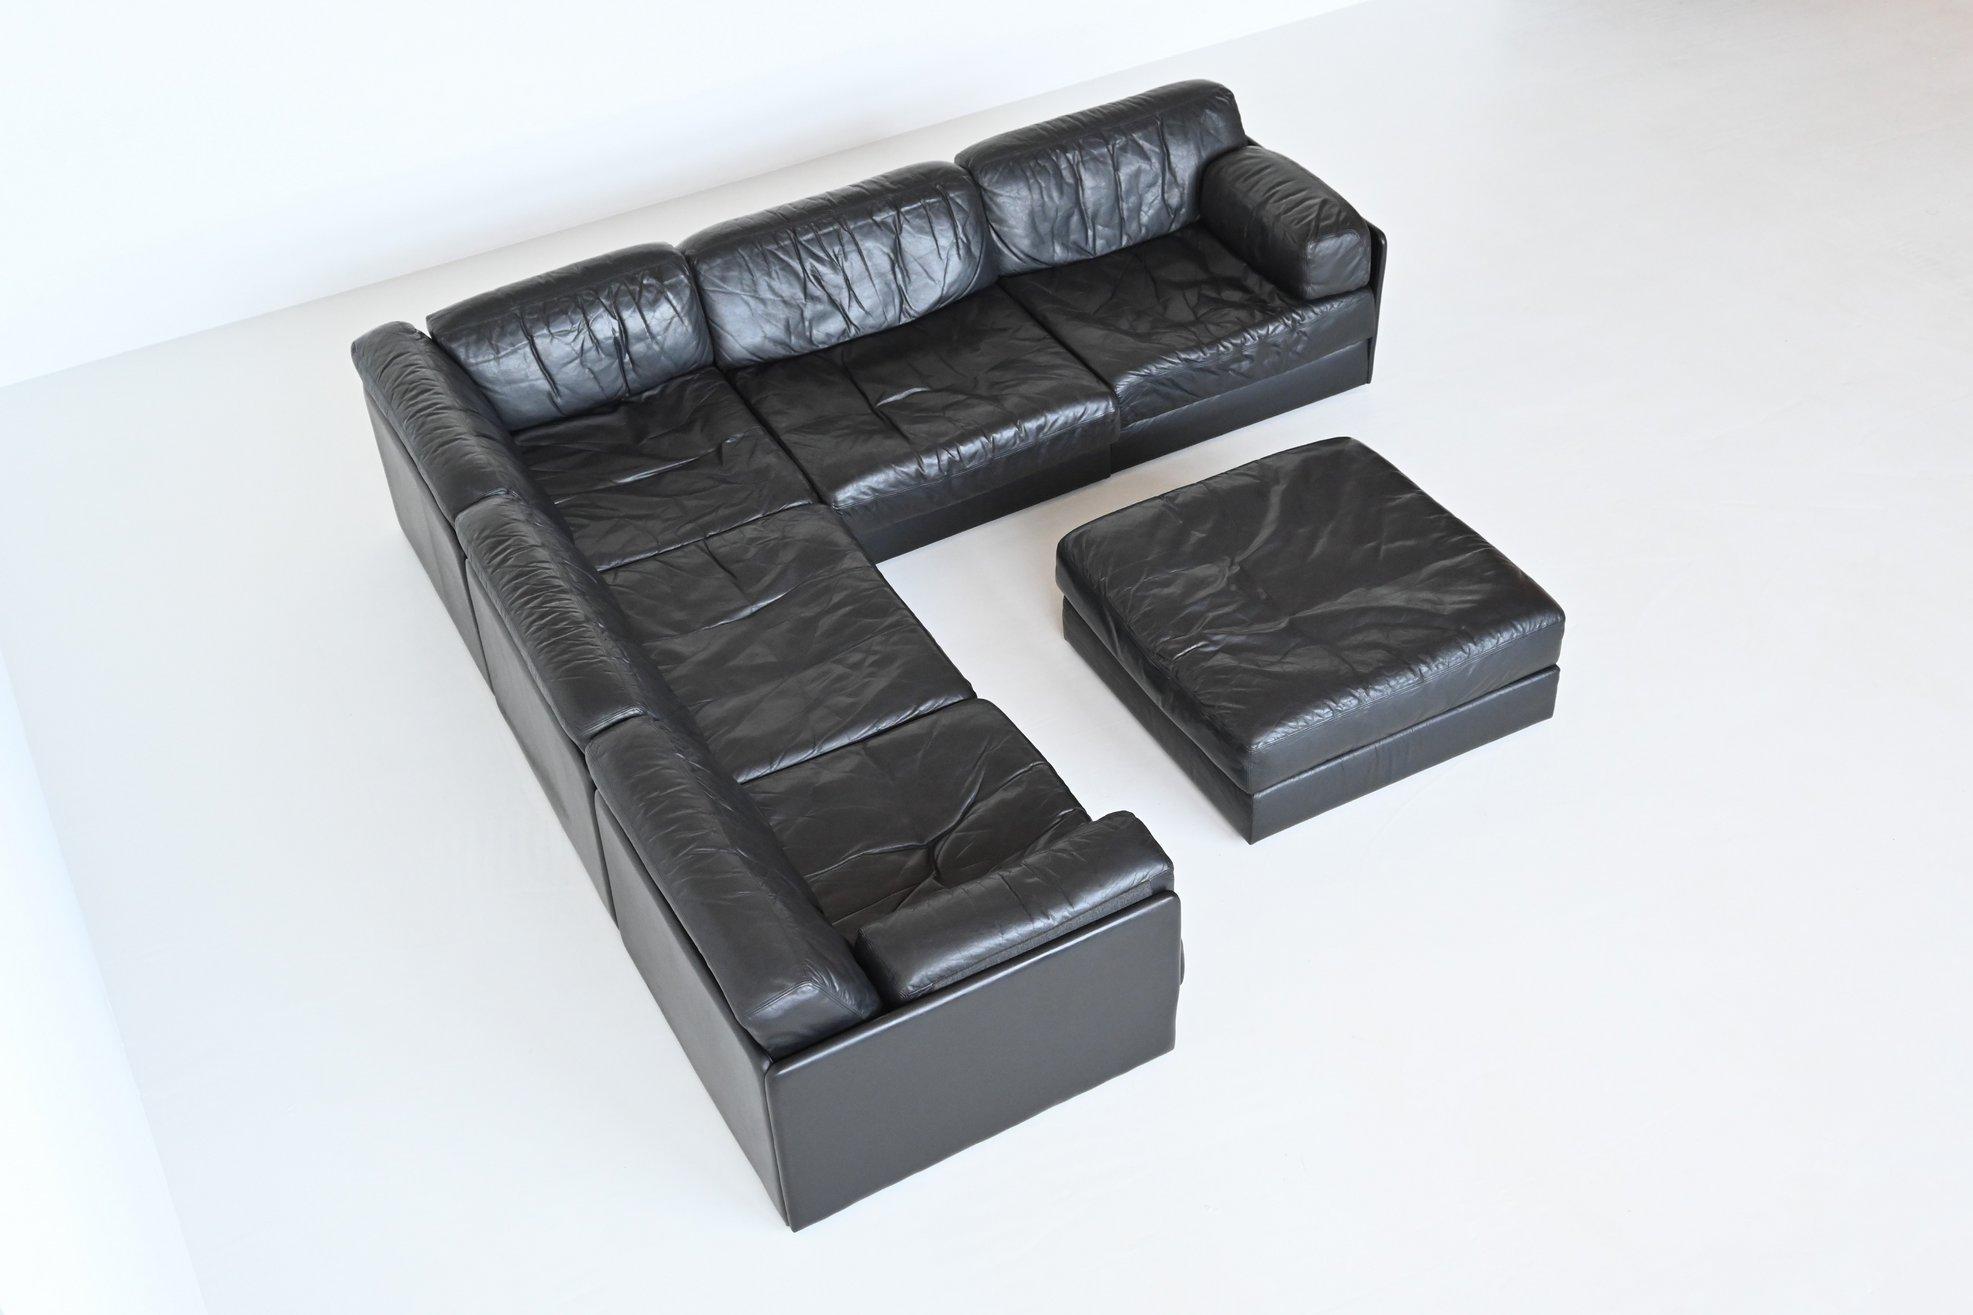 Beautiful large and multi-functional sofa set model DS76 designed and manufactured by De Sede, Switzerland 1970. This sofa is made of high quality black leather and finished by hand with high levels of craftsmanship and eye for detail. De Sede is